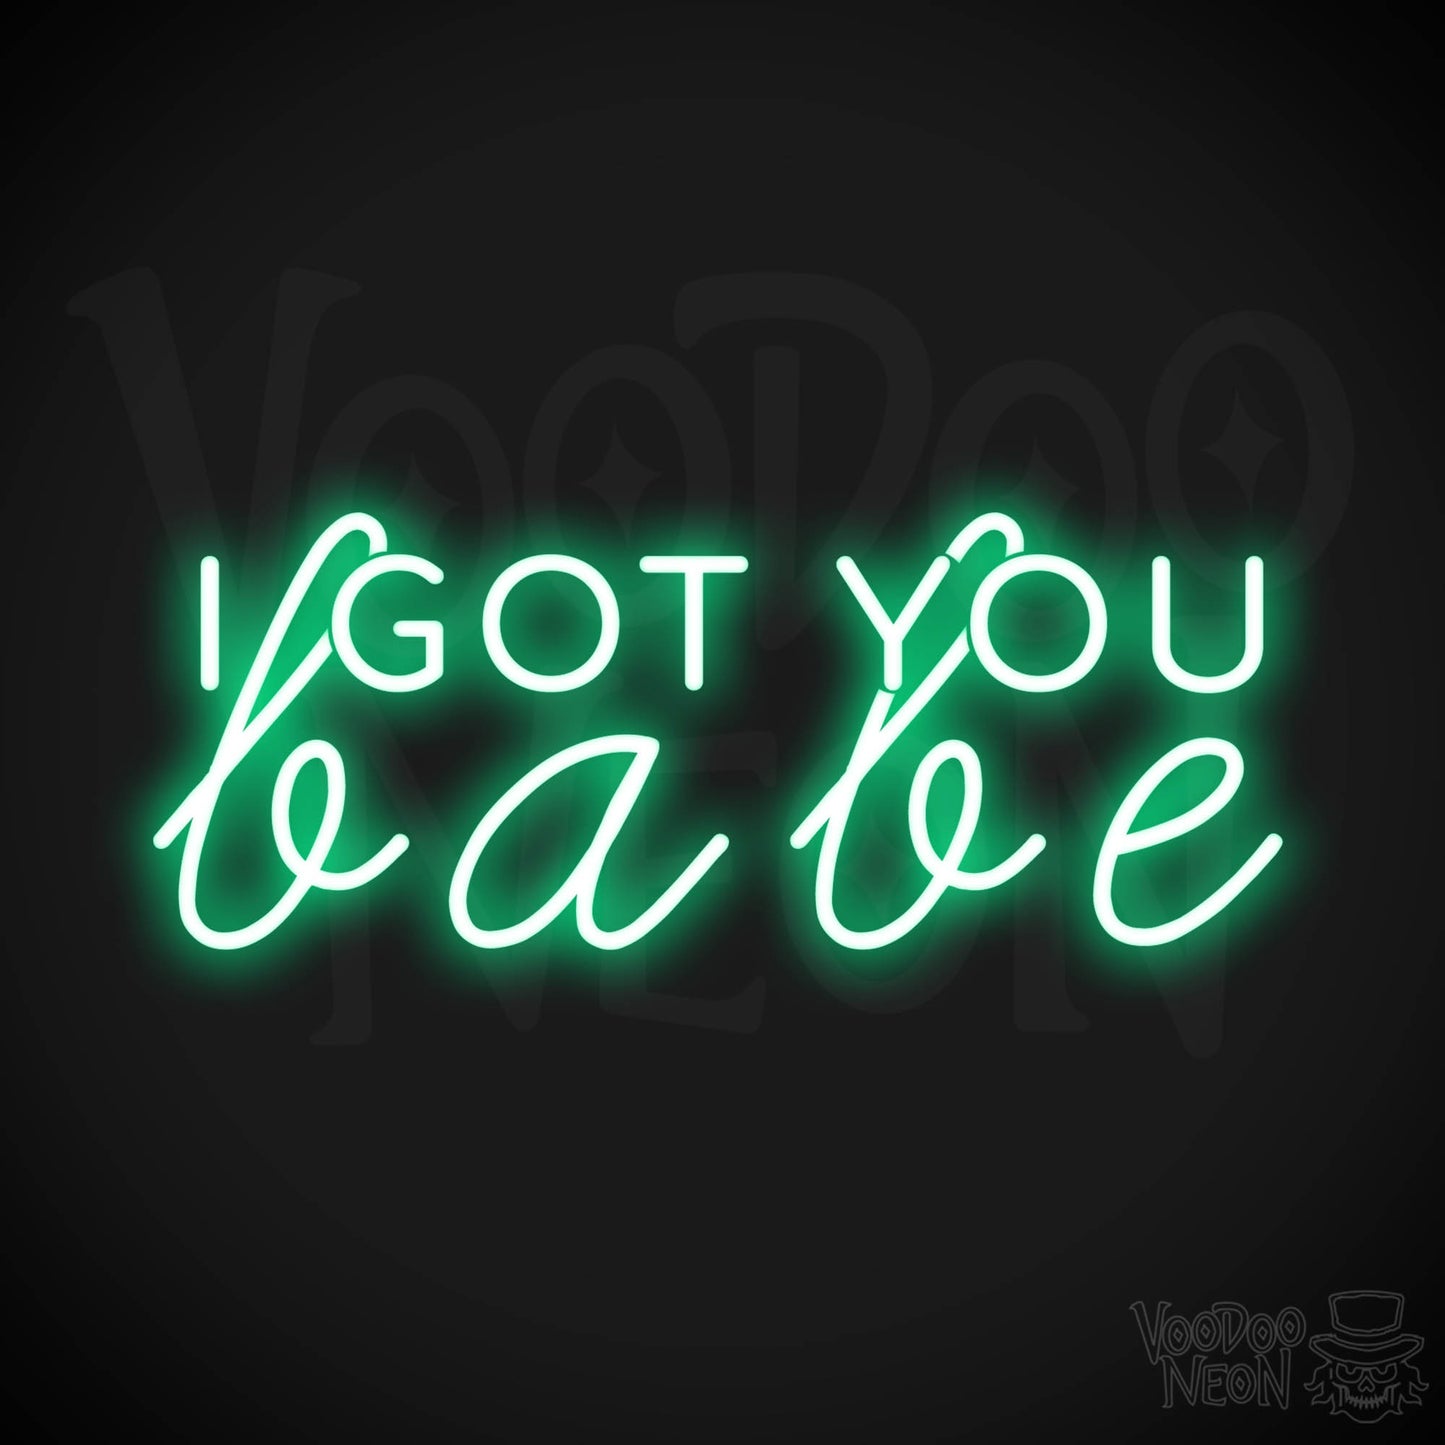 I Got You Babe LED Neon Sign - Neon I Got You Babe Sign - Color Green